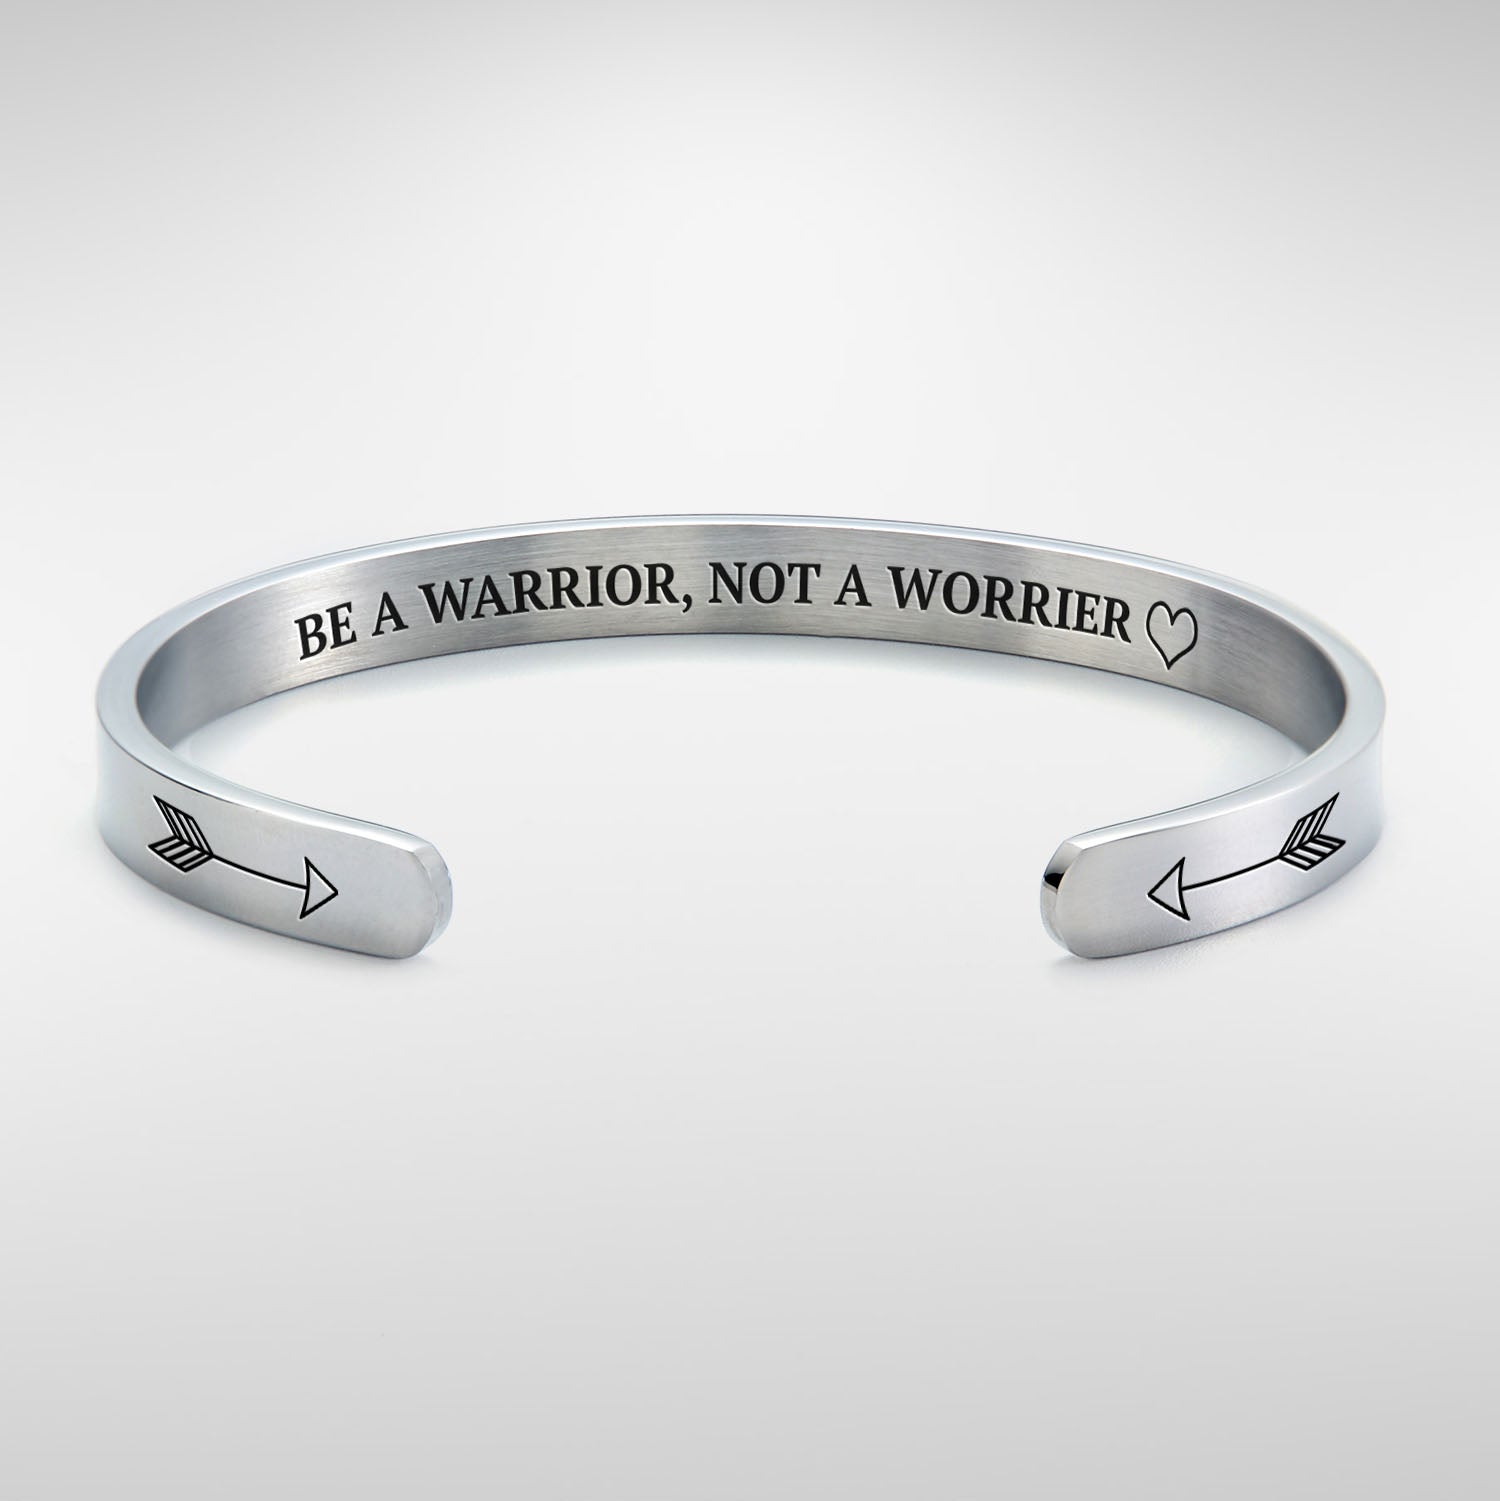 Be a warrior, not a worrier bracelet with silver plating